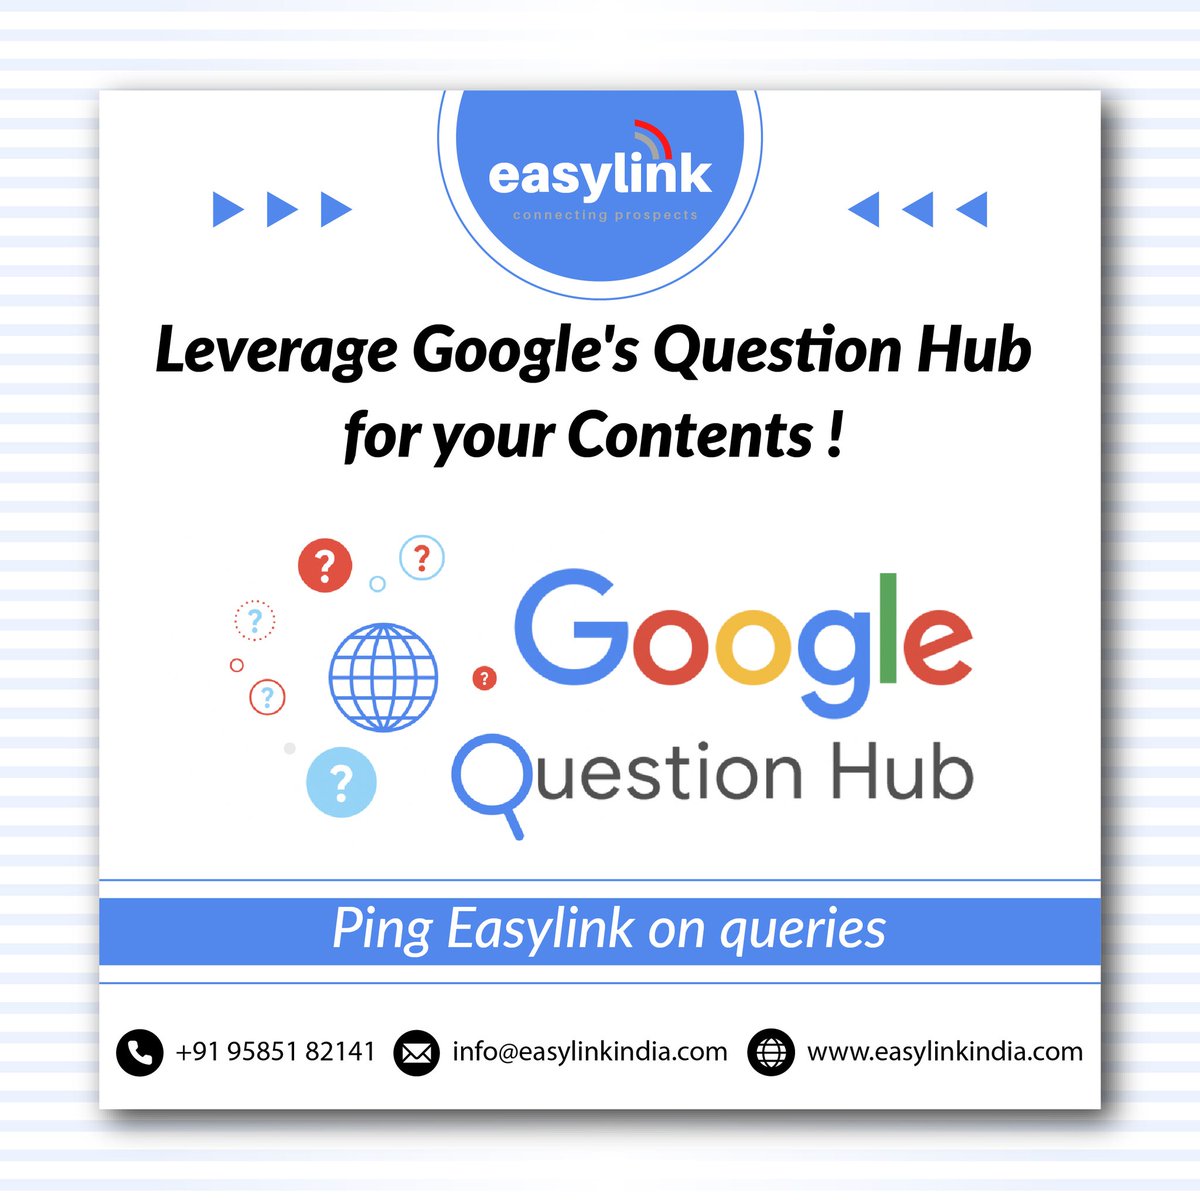 Leverage Google's Question Hub for your Contents ! Ping Easylink on queries. 
For more: 91-9585182141 easylinkindia.com
#google #Googlequestionhub #contents #contentstrategy #contentmarketing #contentcreation #marketing #contentstrategytips #socialmediamarketing  #webresult